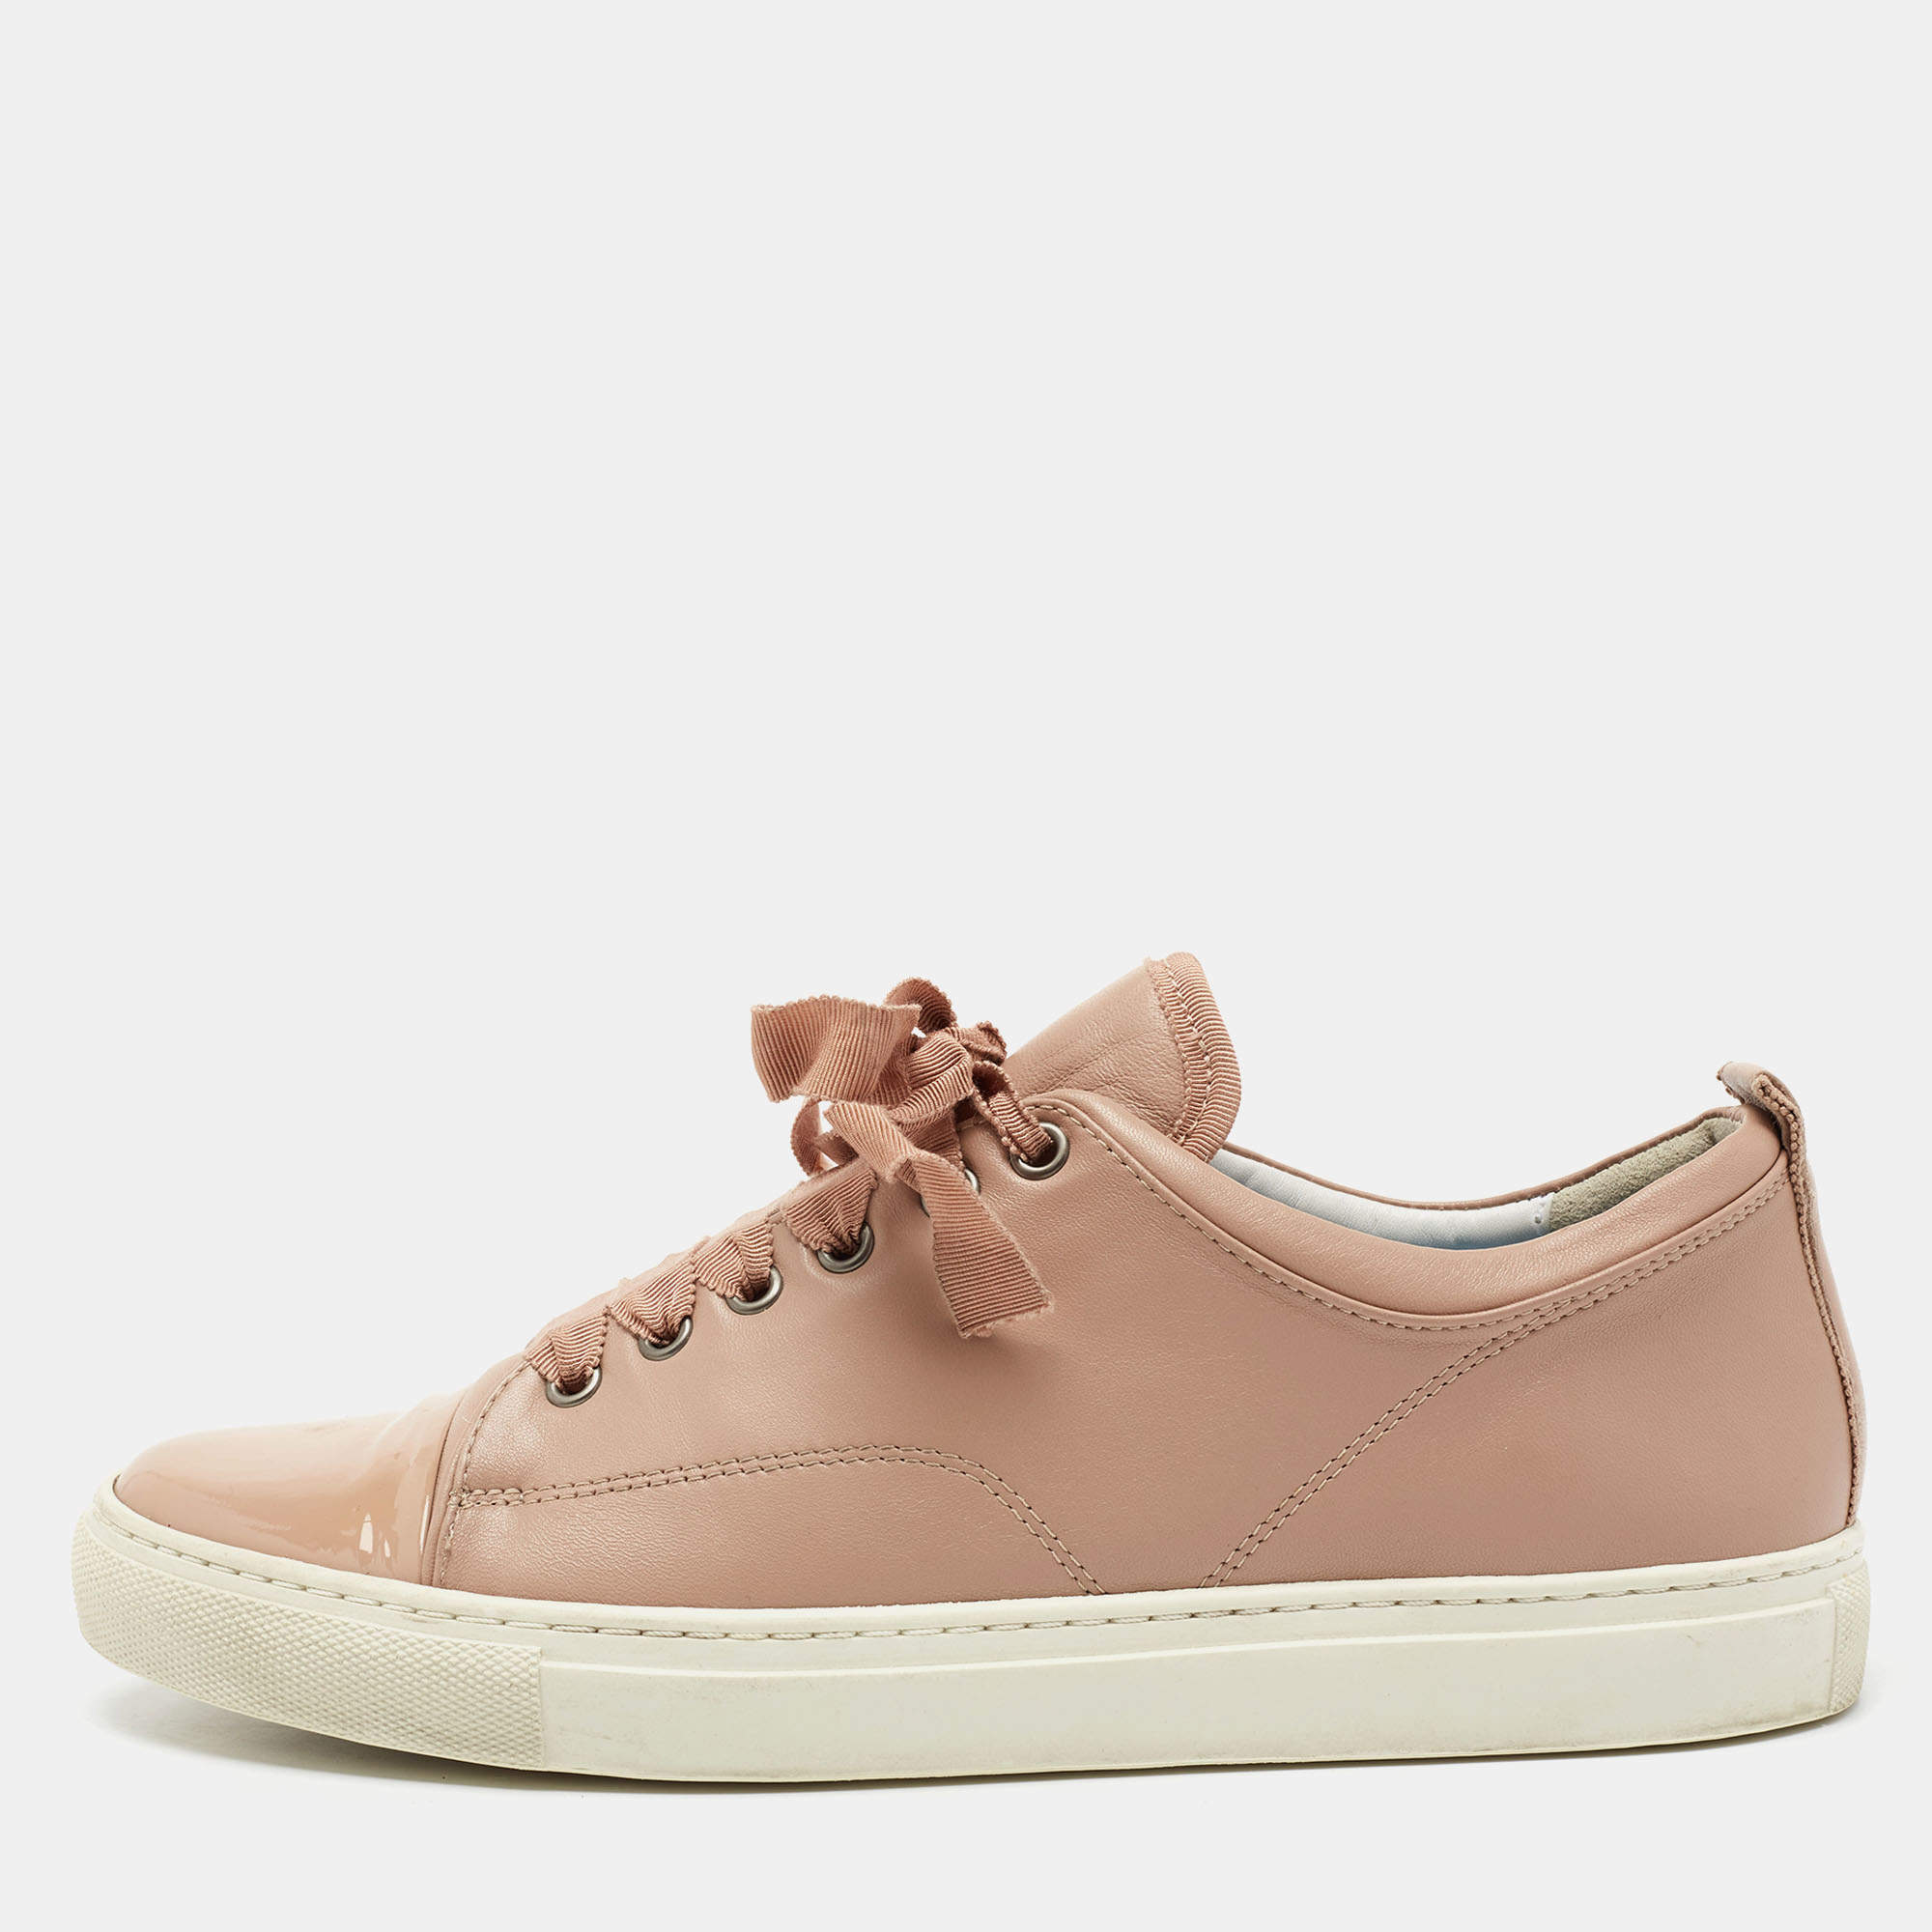 Lanvin Dusty Leather and Patent Cap Toe Low-Top Sneakers 40 Lanvin | TLC